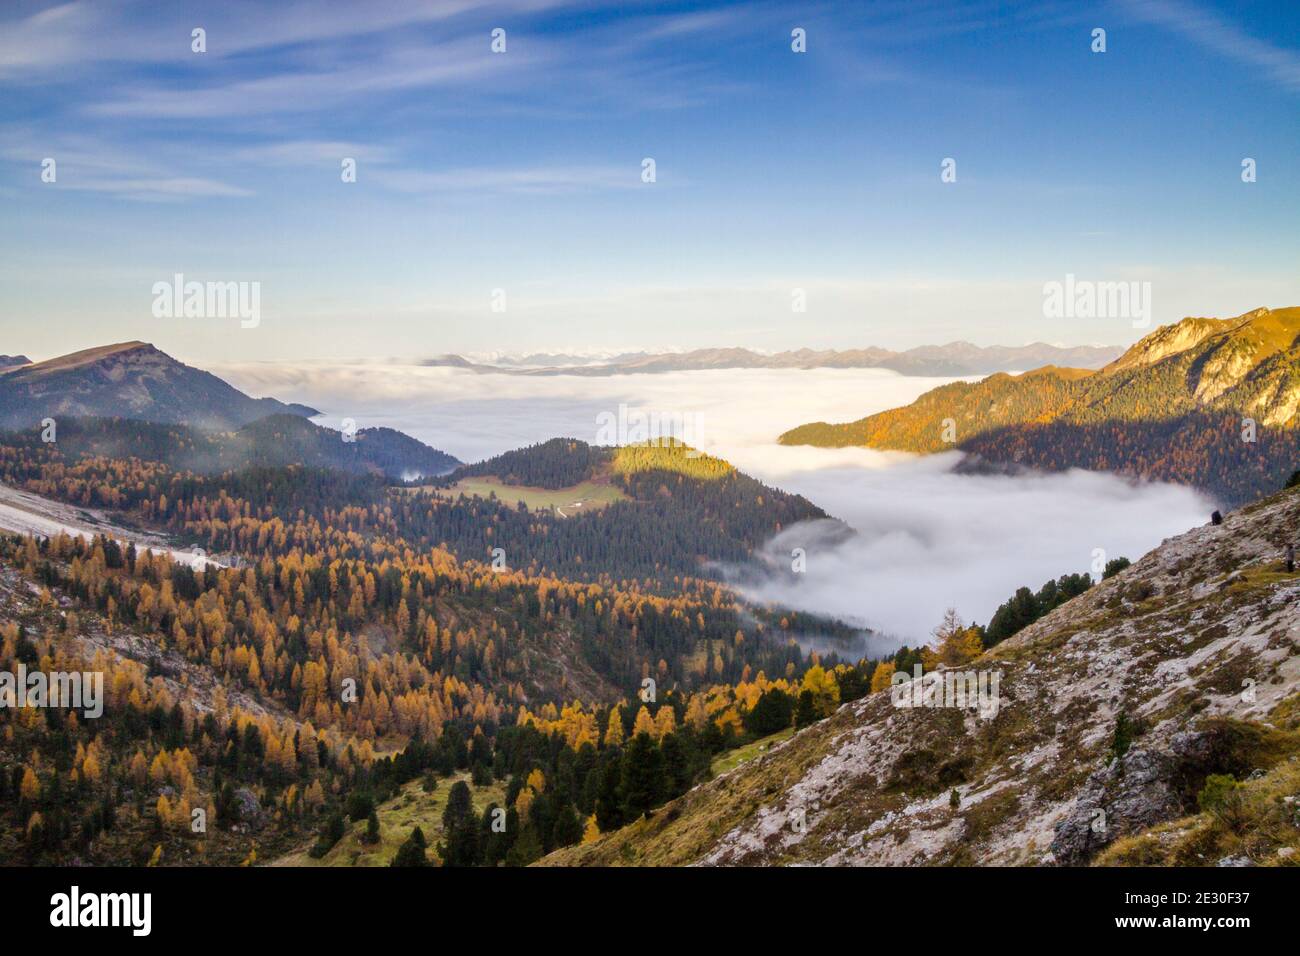 View of the panorama during a sunrise from Forcella De Furcia. Funes Valley, Dolomites Alps, Trentino Alto Adige, Italy. Stock Photo